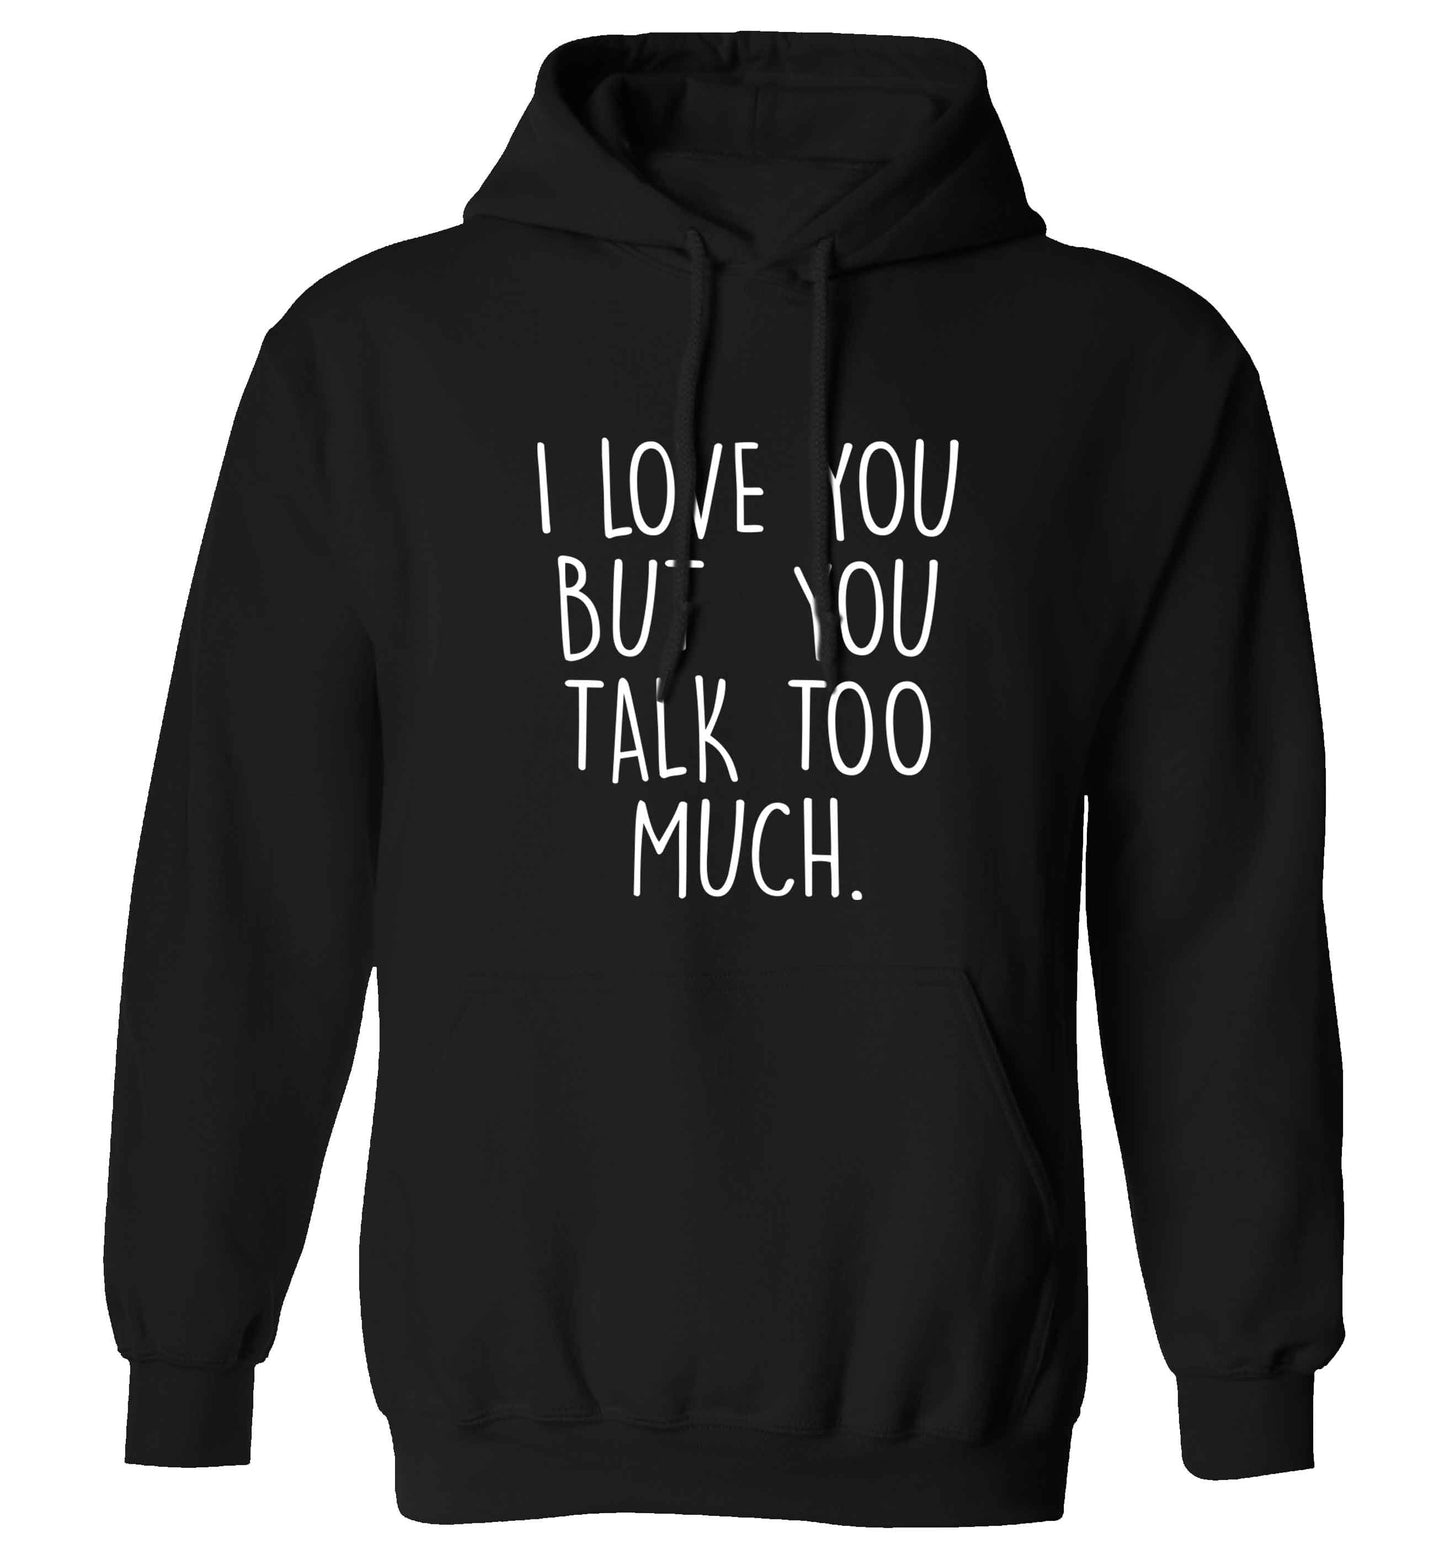 I love you but you talk too much adults unisex black hoodie 2XL